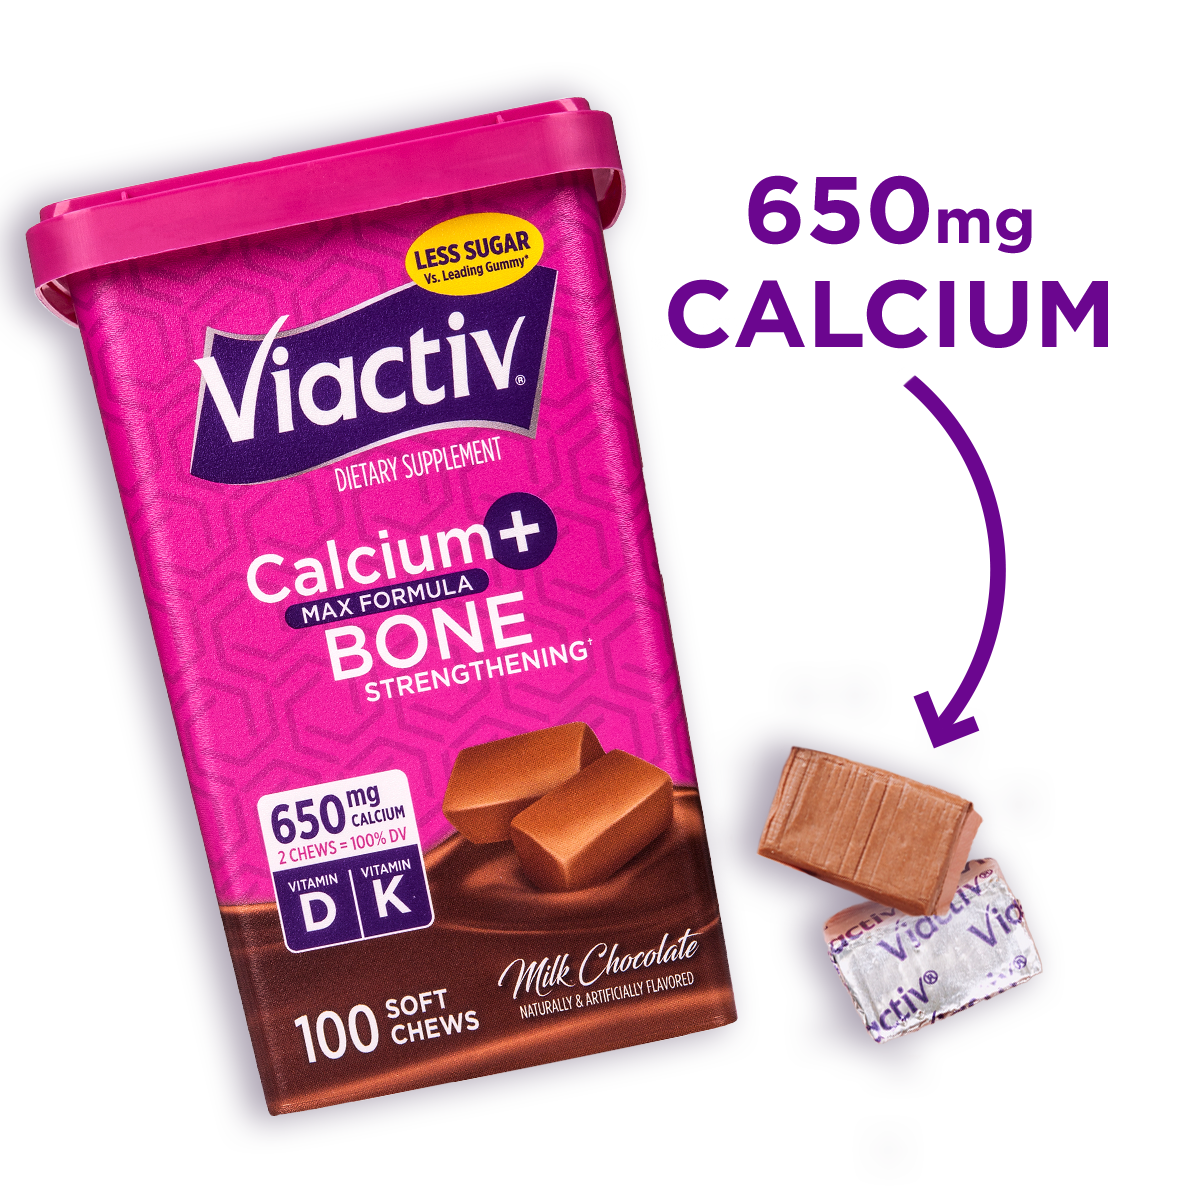 Calcium Chews Packaging highlighting the 650mg of calcium contained in each chew